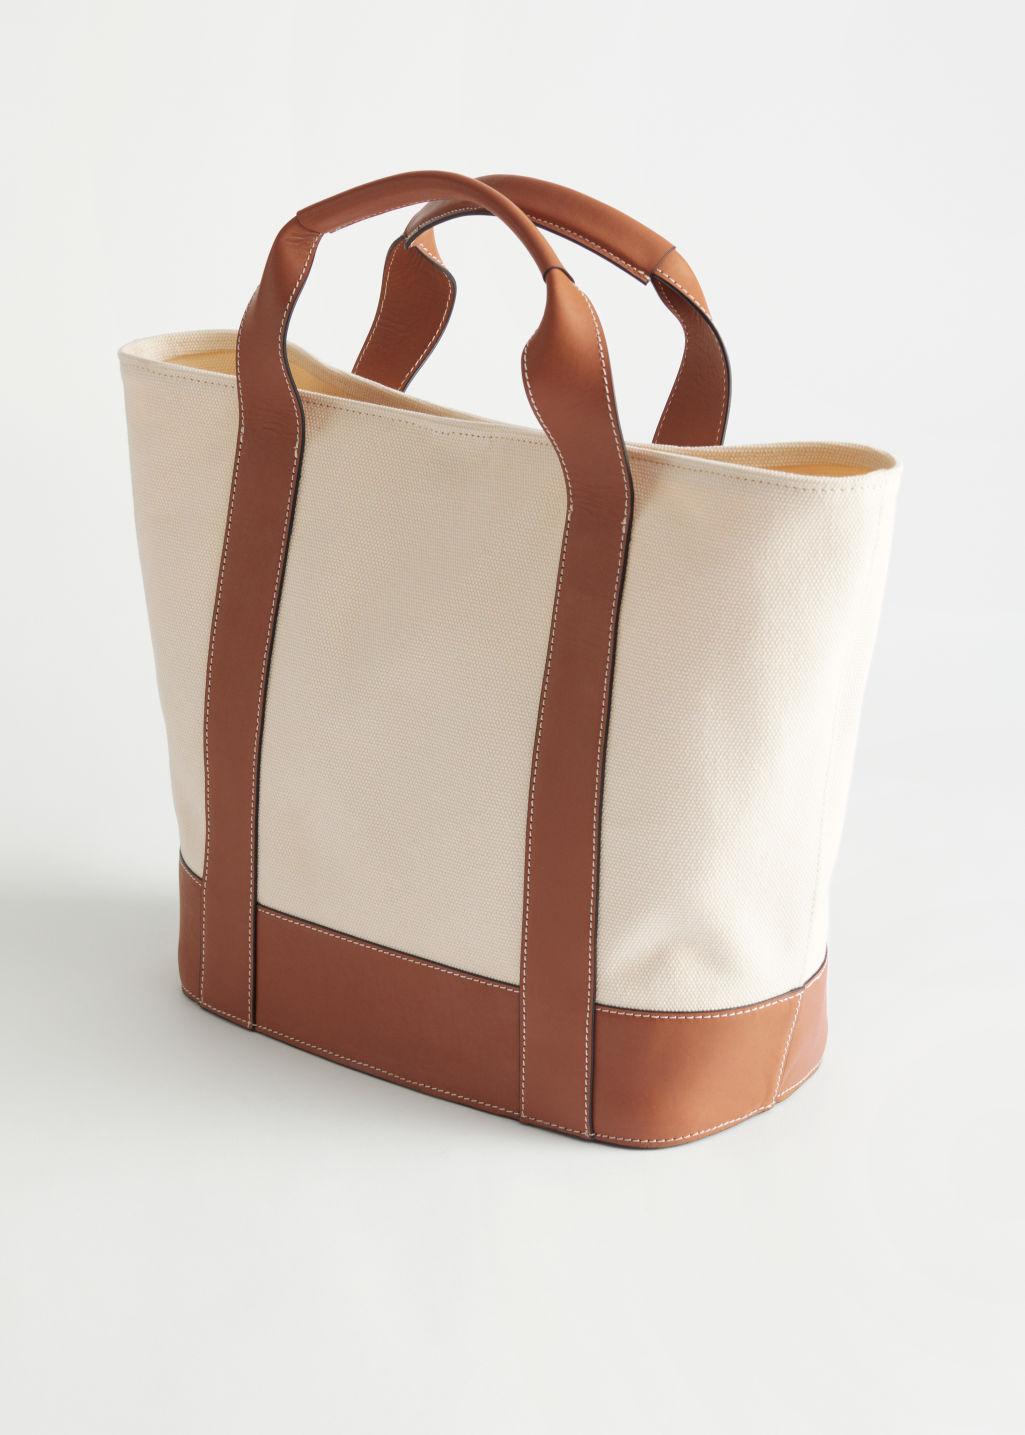 & Other Stories Canvas Leather Tote Bag in White | Lyst